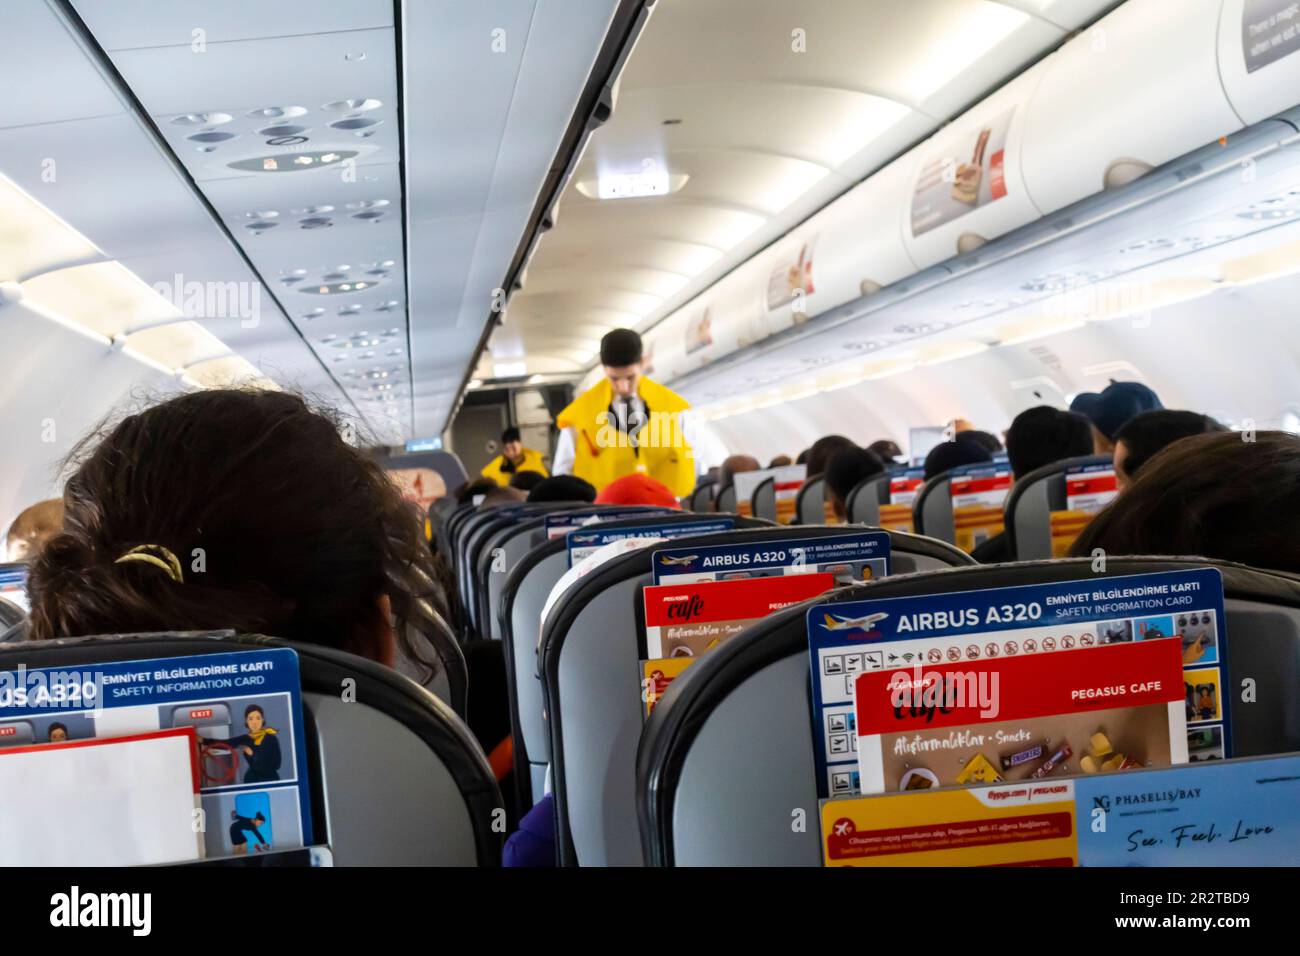 A flight attendant out of focus, blurred demonstrating life vest to passengers in a Boeing 737 operated by Pegasus airlines Stock Photo